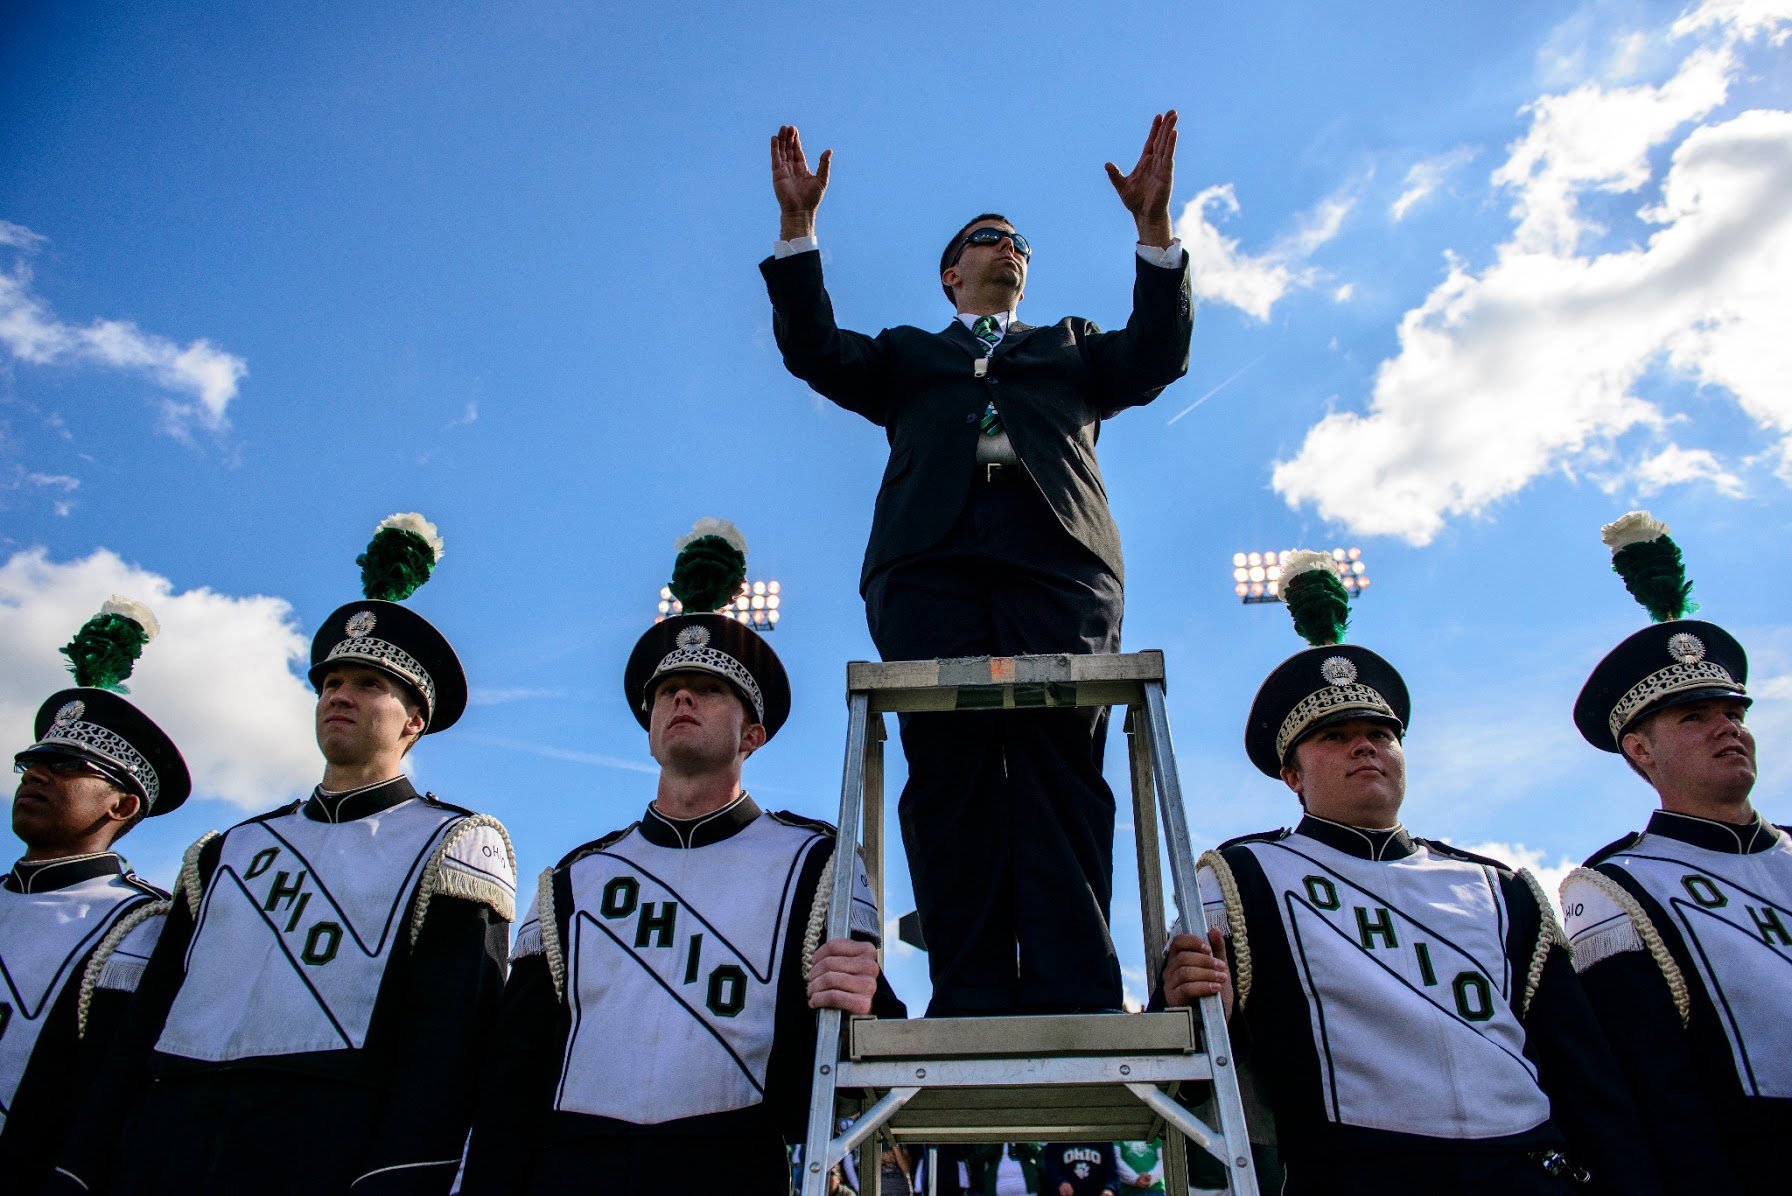 Ken Will conducting the Marching 110 in 2012